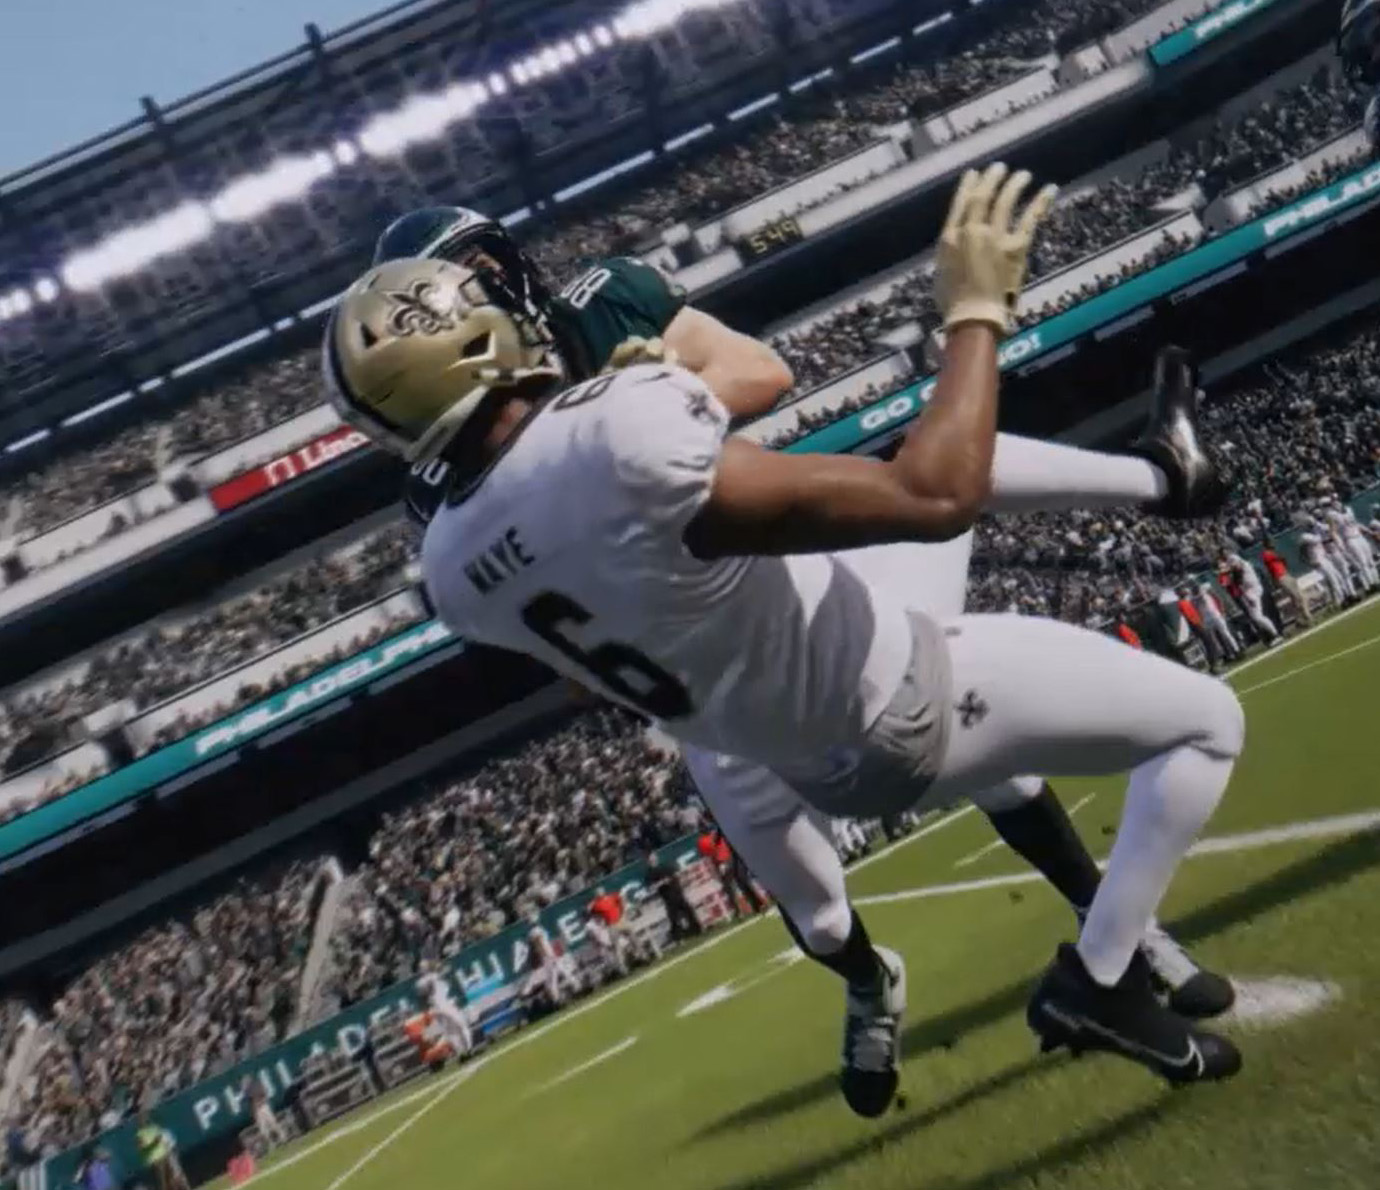 Madden NFL 24 - With FieldSENSE™ and SAPIEN Technology - Electronic Arts